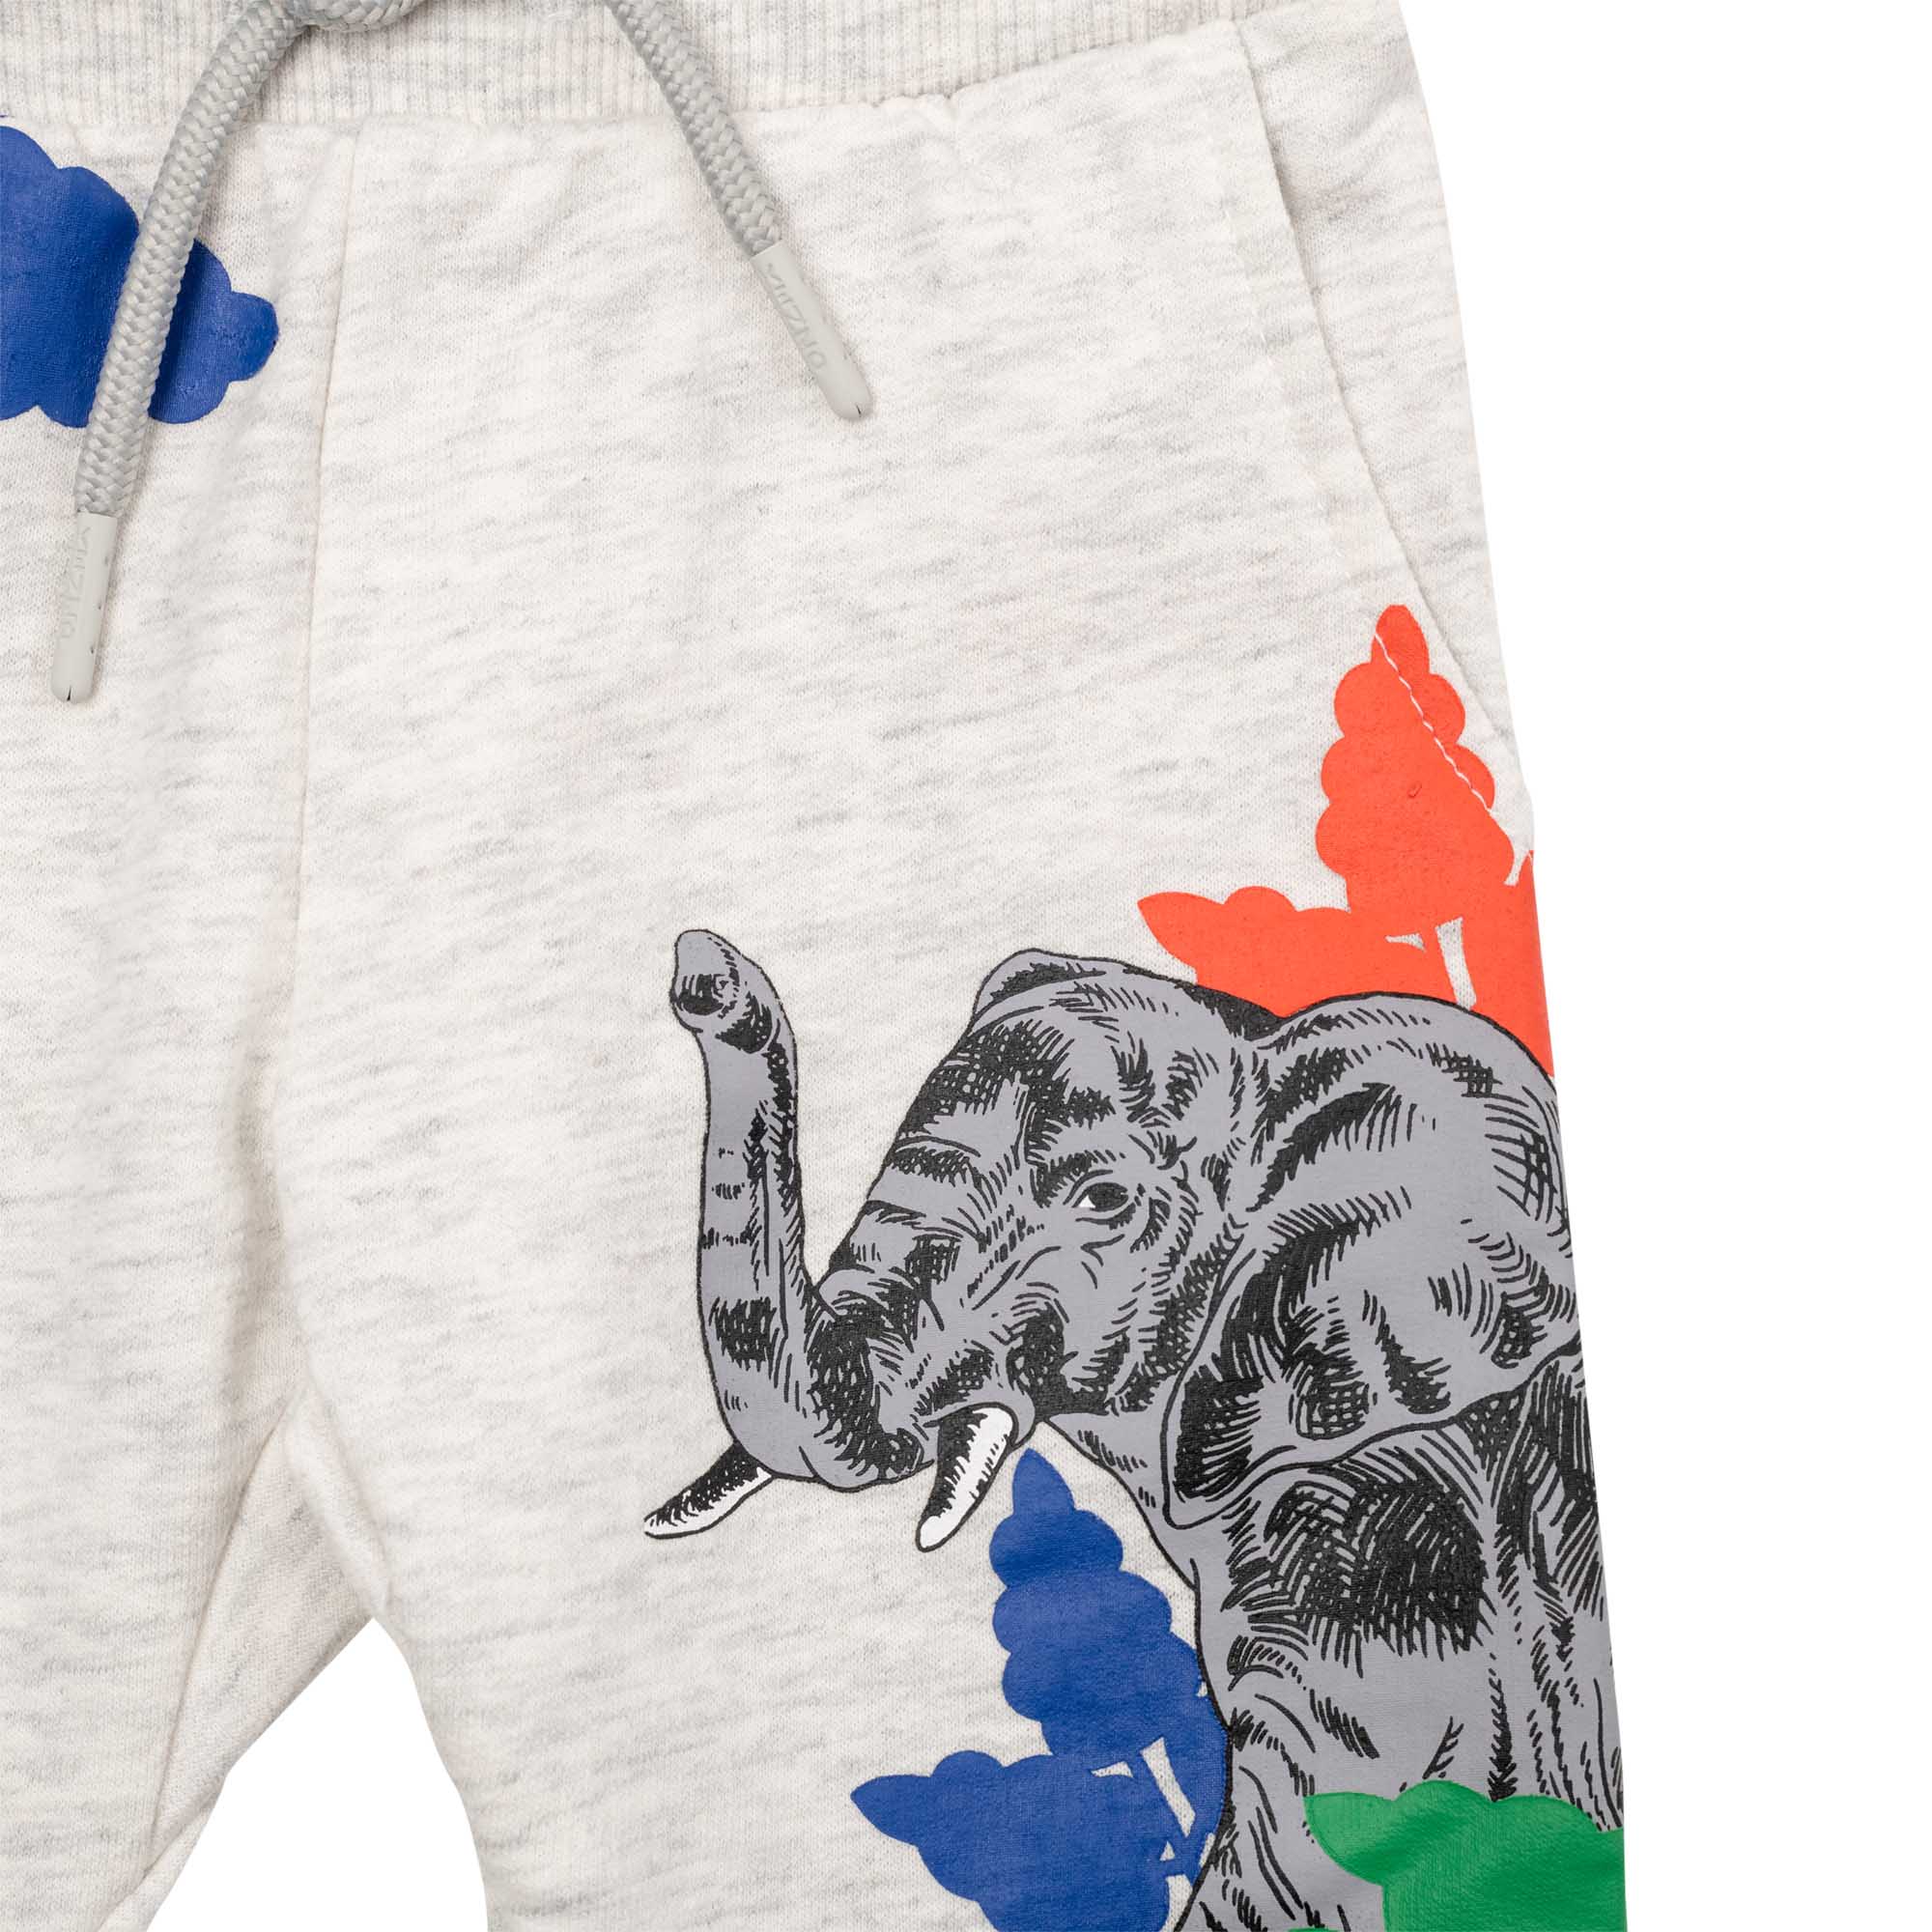 Baby Boys Grey Printed Cotton Trousers